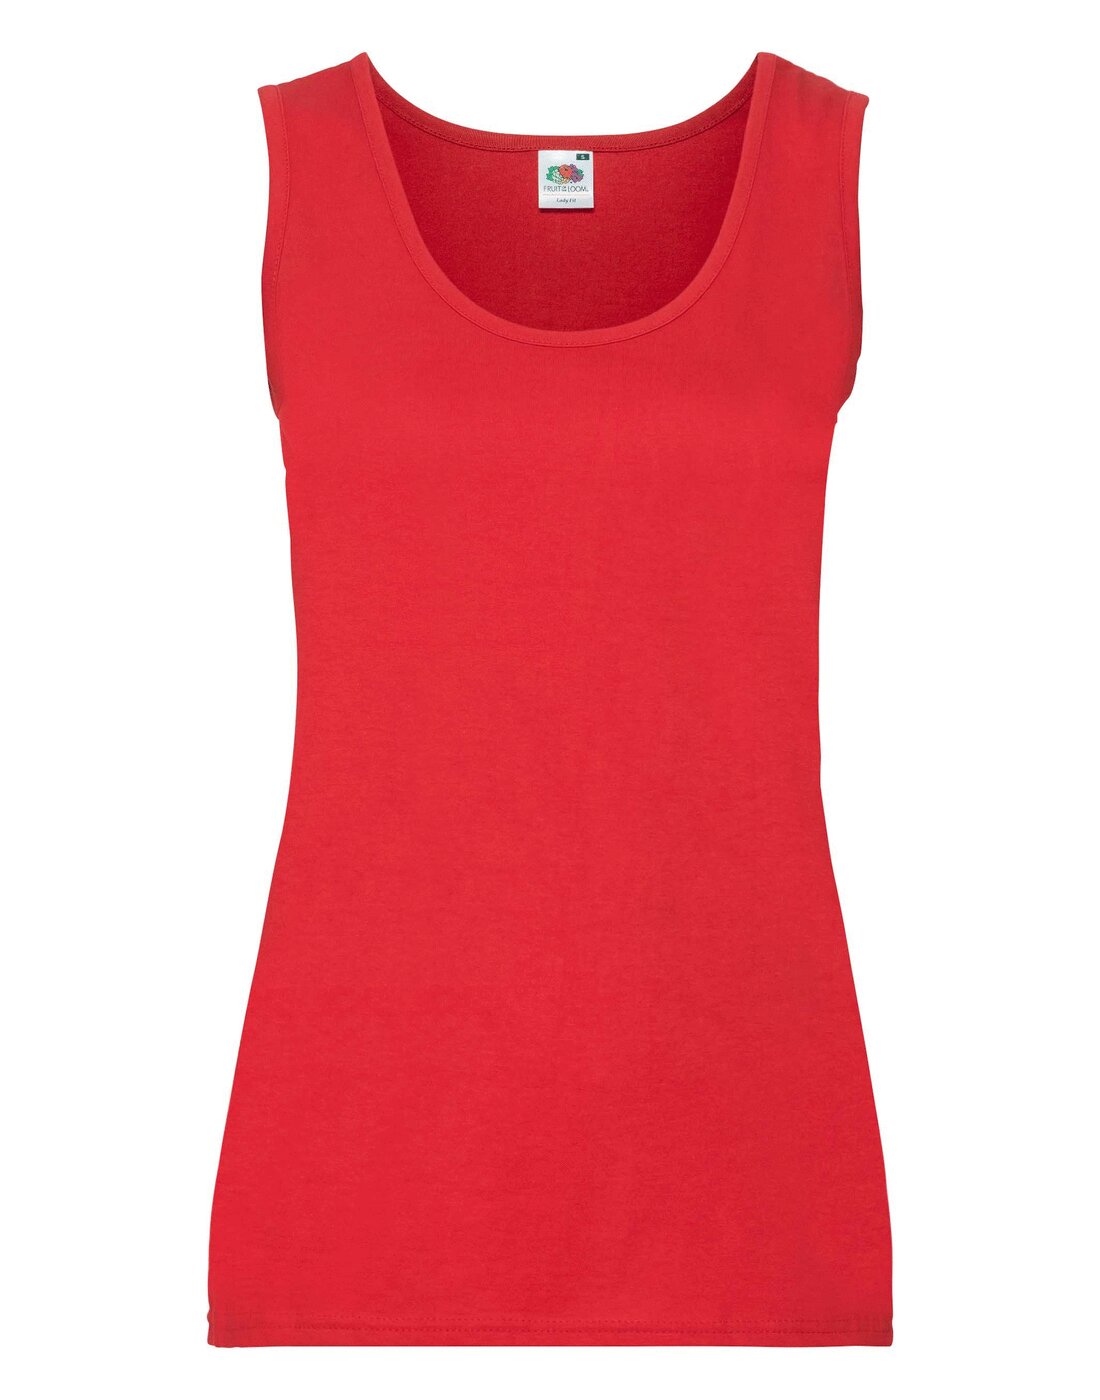 Fruit of the Loom Ladies Valueweight Vest - Red